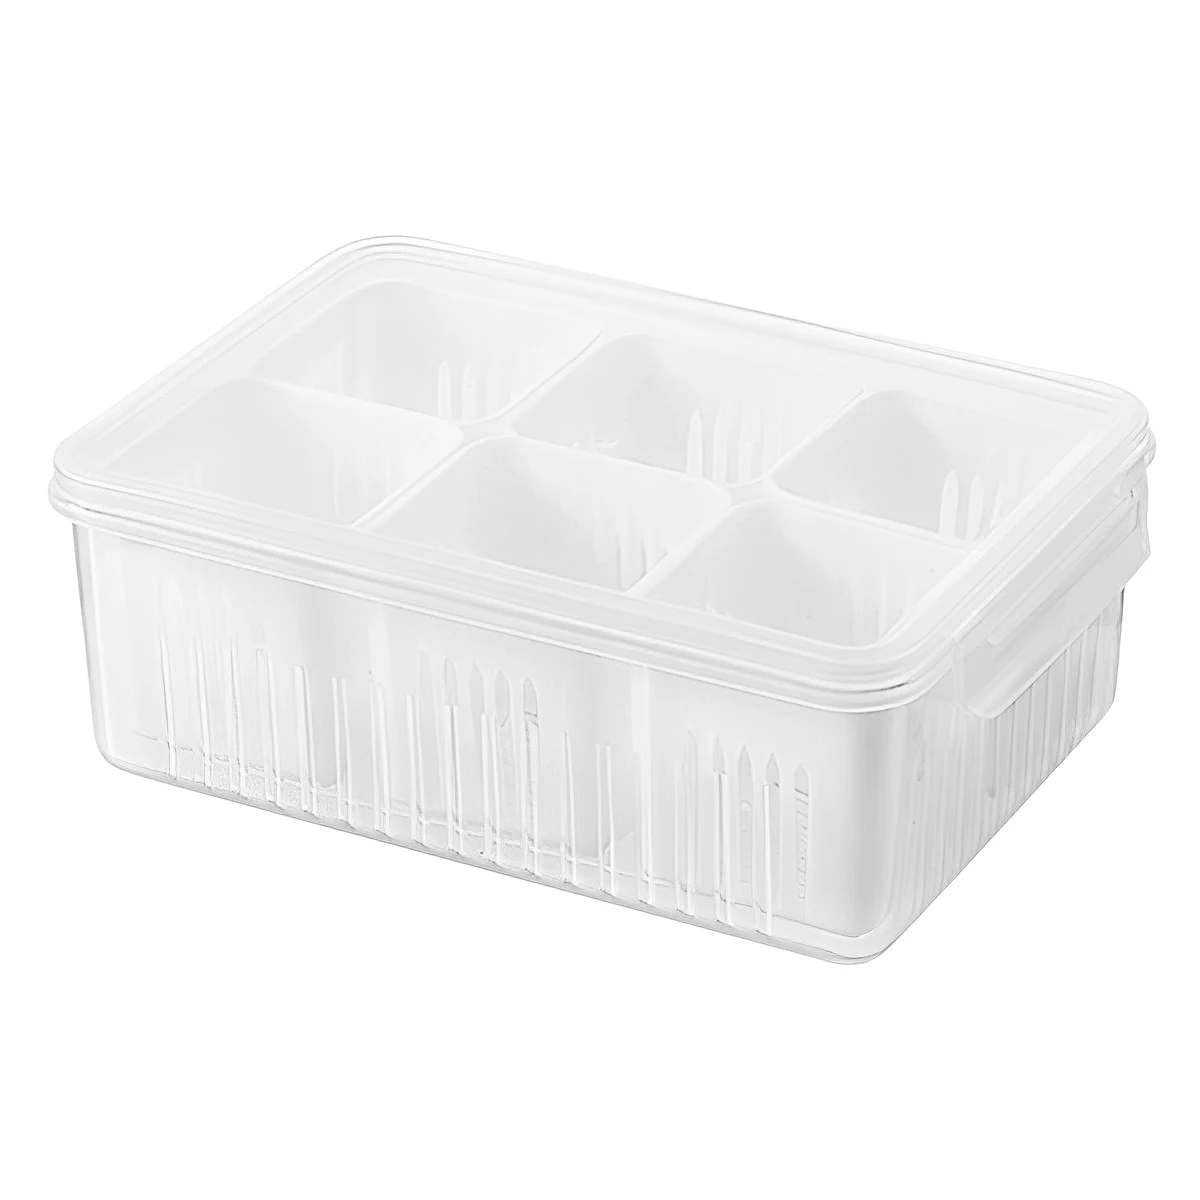 

NEW Scallion Preservation Box Plastic Fridge Fresh-Keeping Container with Lid and 6 Grids Draining Crisper Portable Divided